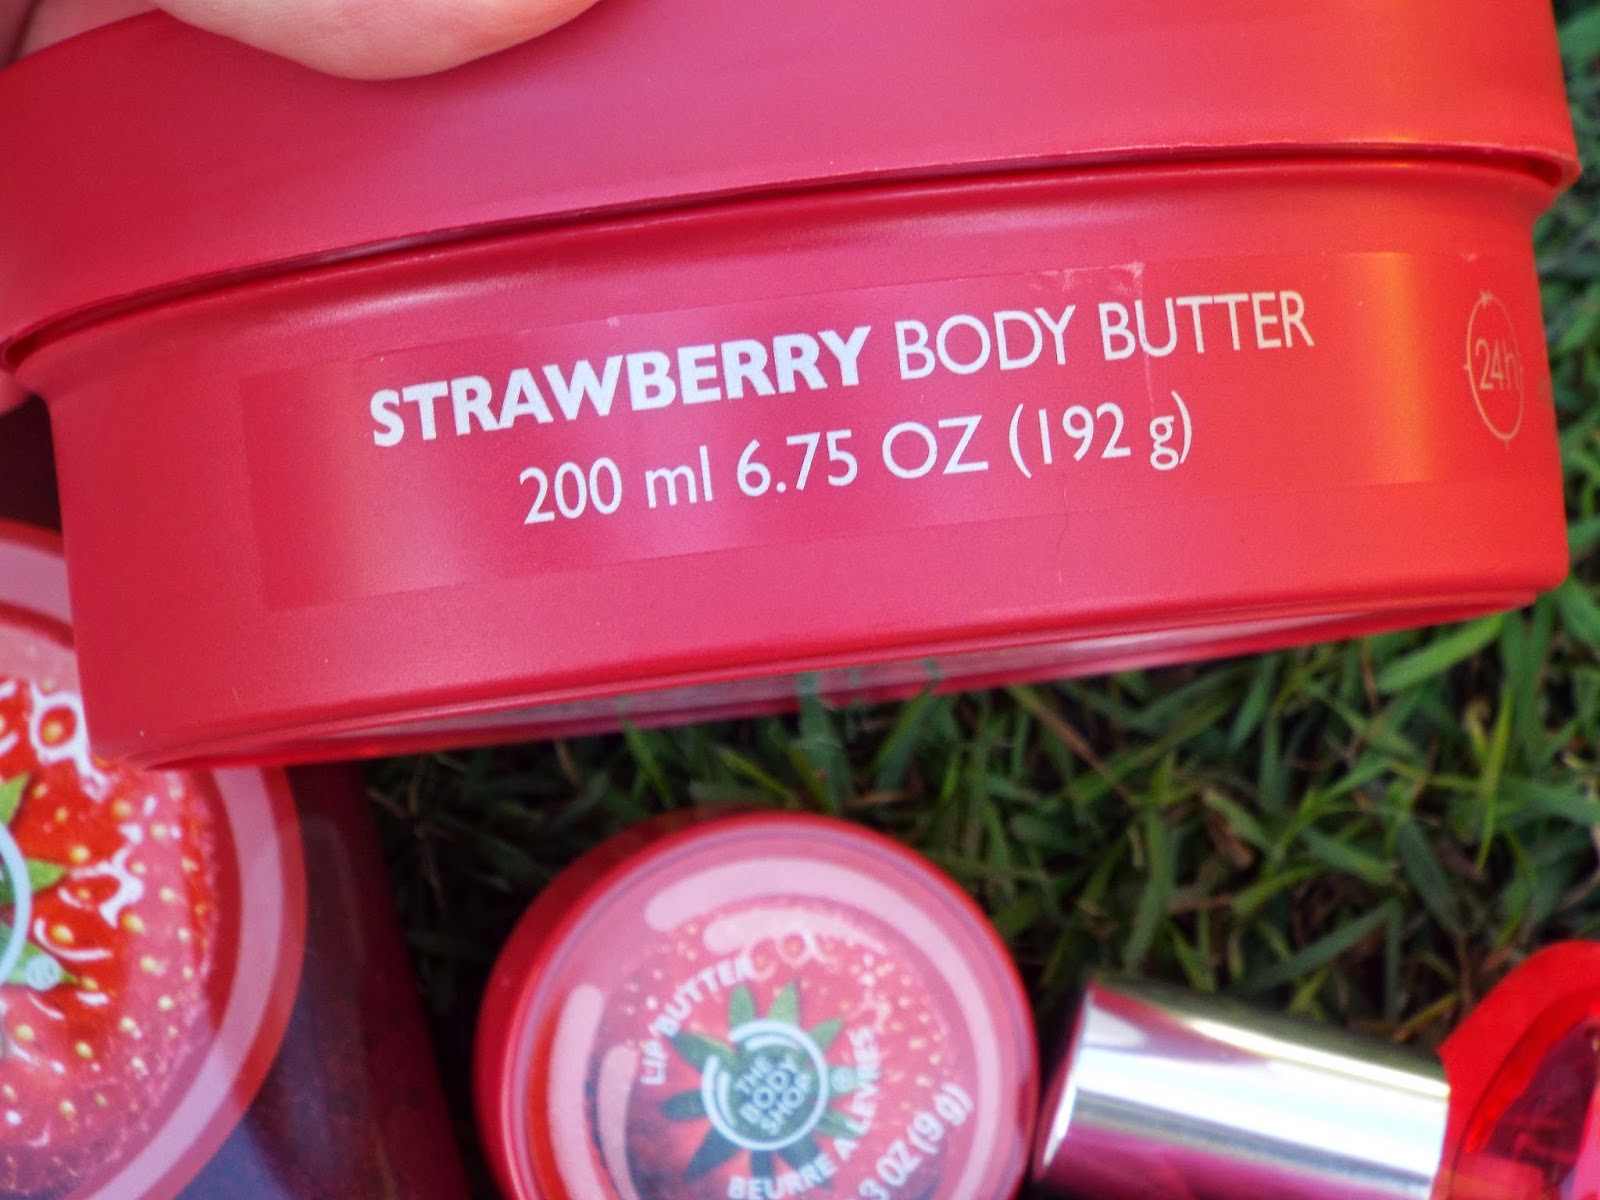 image of strawberry body butter from the body shop